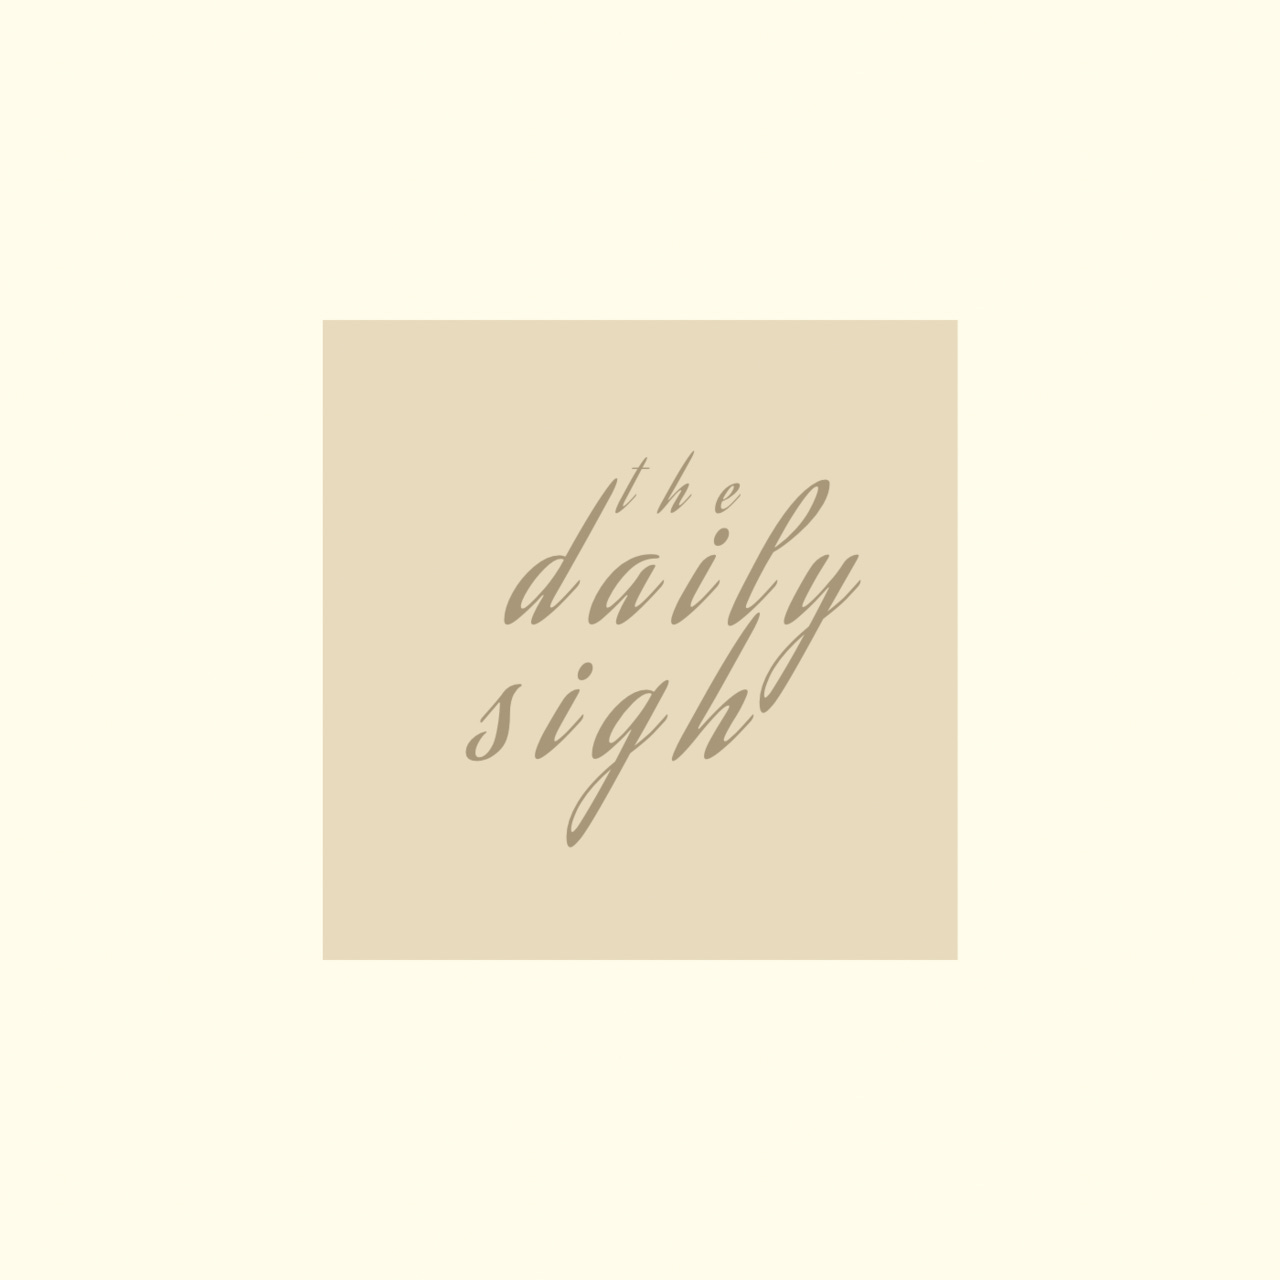 Artwork for The Daily Sigh